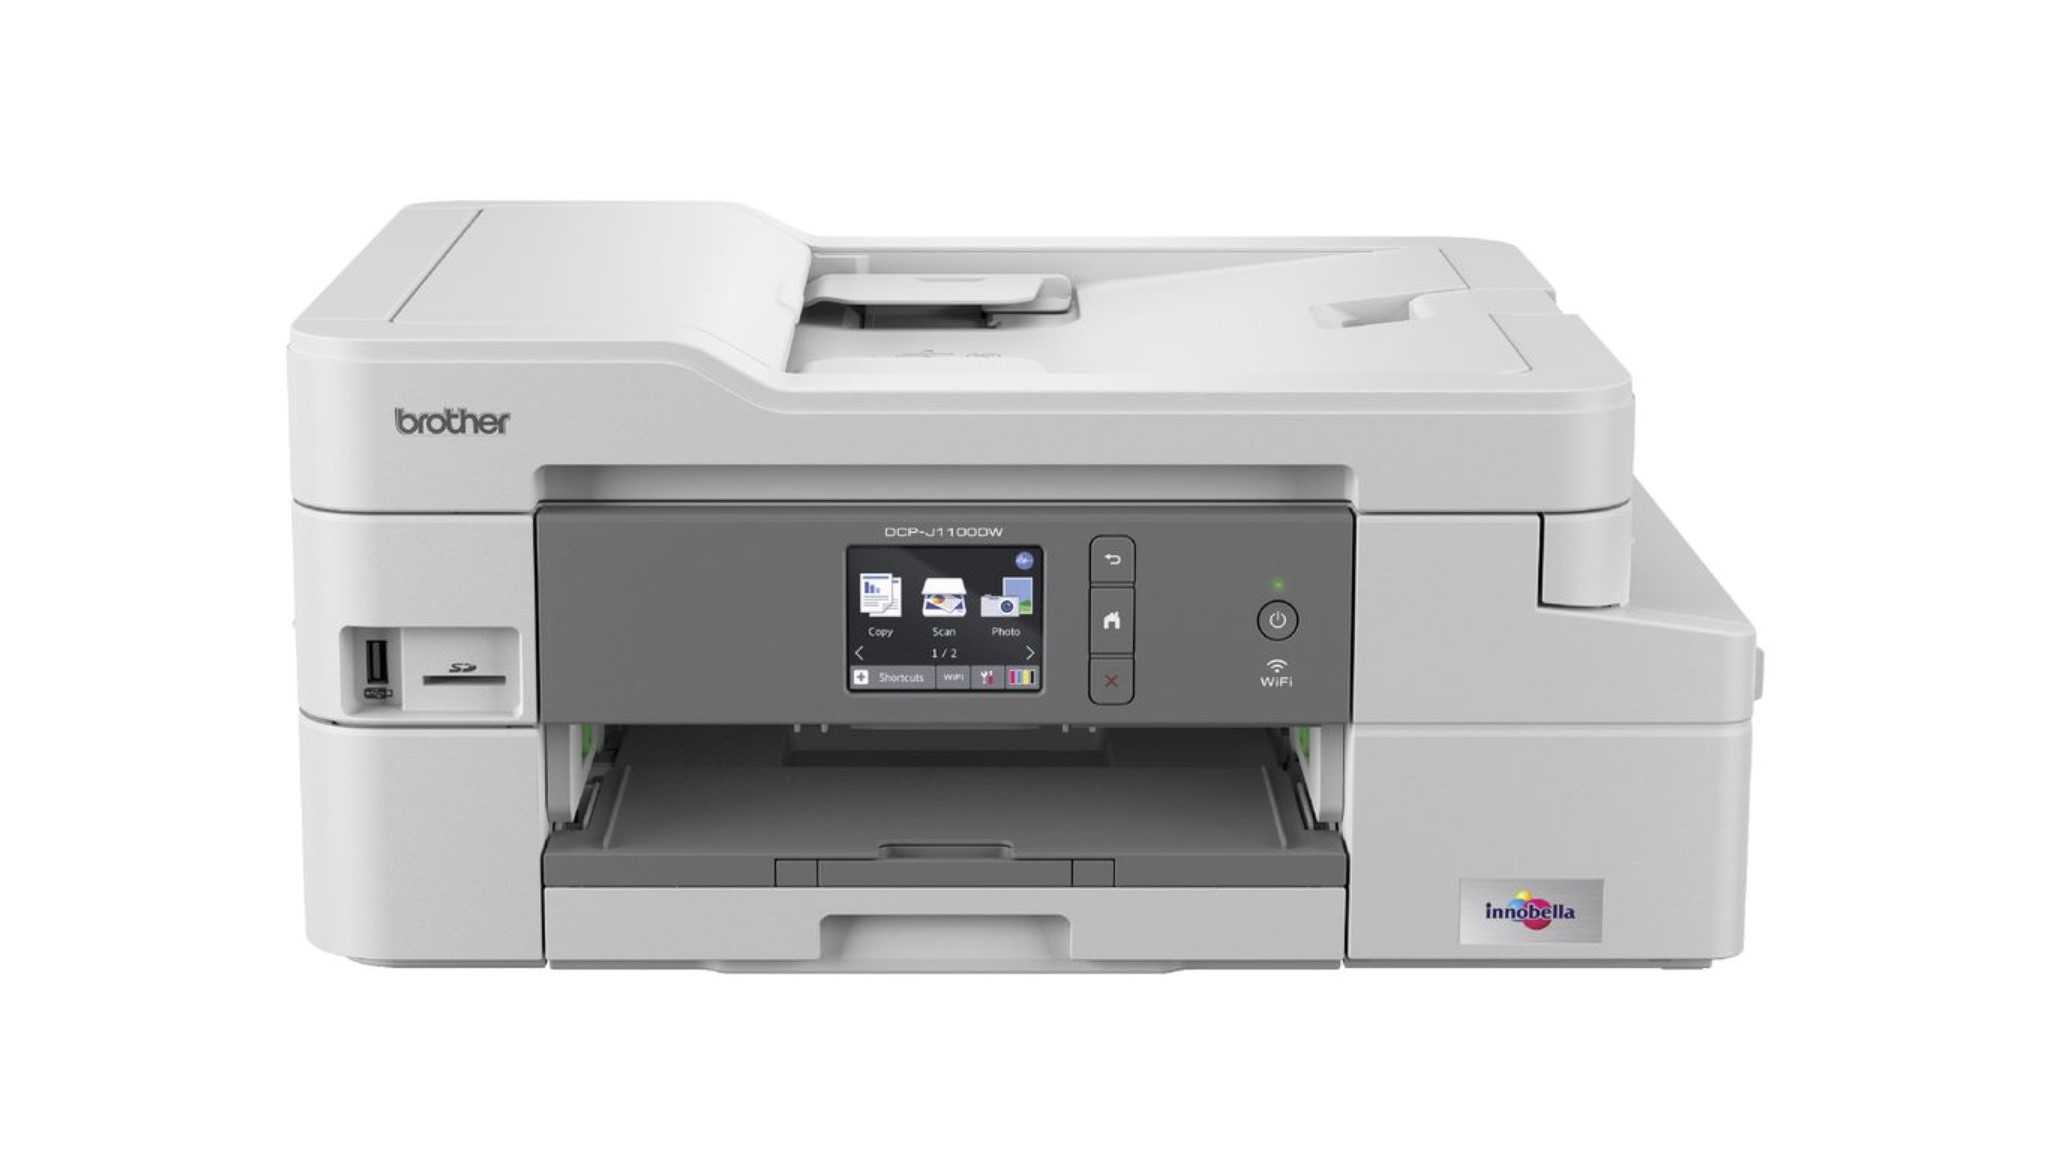 Brother DCP-J1100W